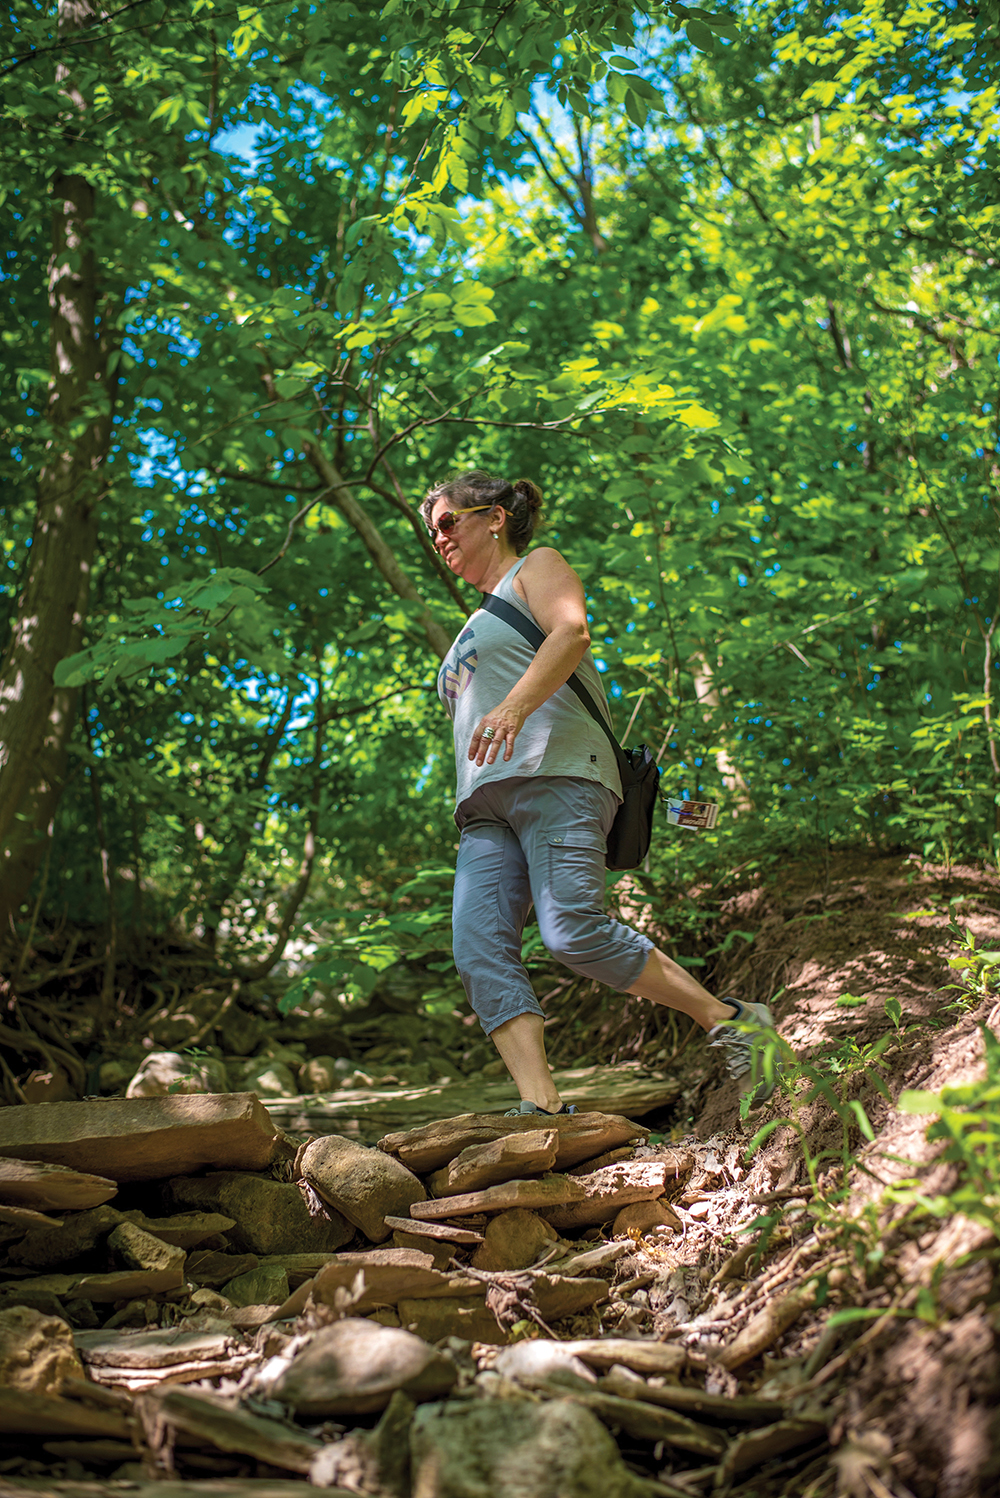 Susan Brindisi hikes The Grind at Blue Mountain Resort, one of 21 hiking and multi-use trails of varying degrees of difficulty open for hikers who have purchased a day pass or have a 5x7 or Ikon season pass for the 2021 season.